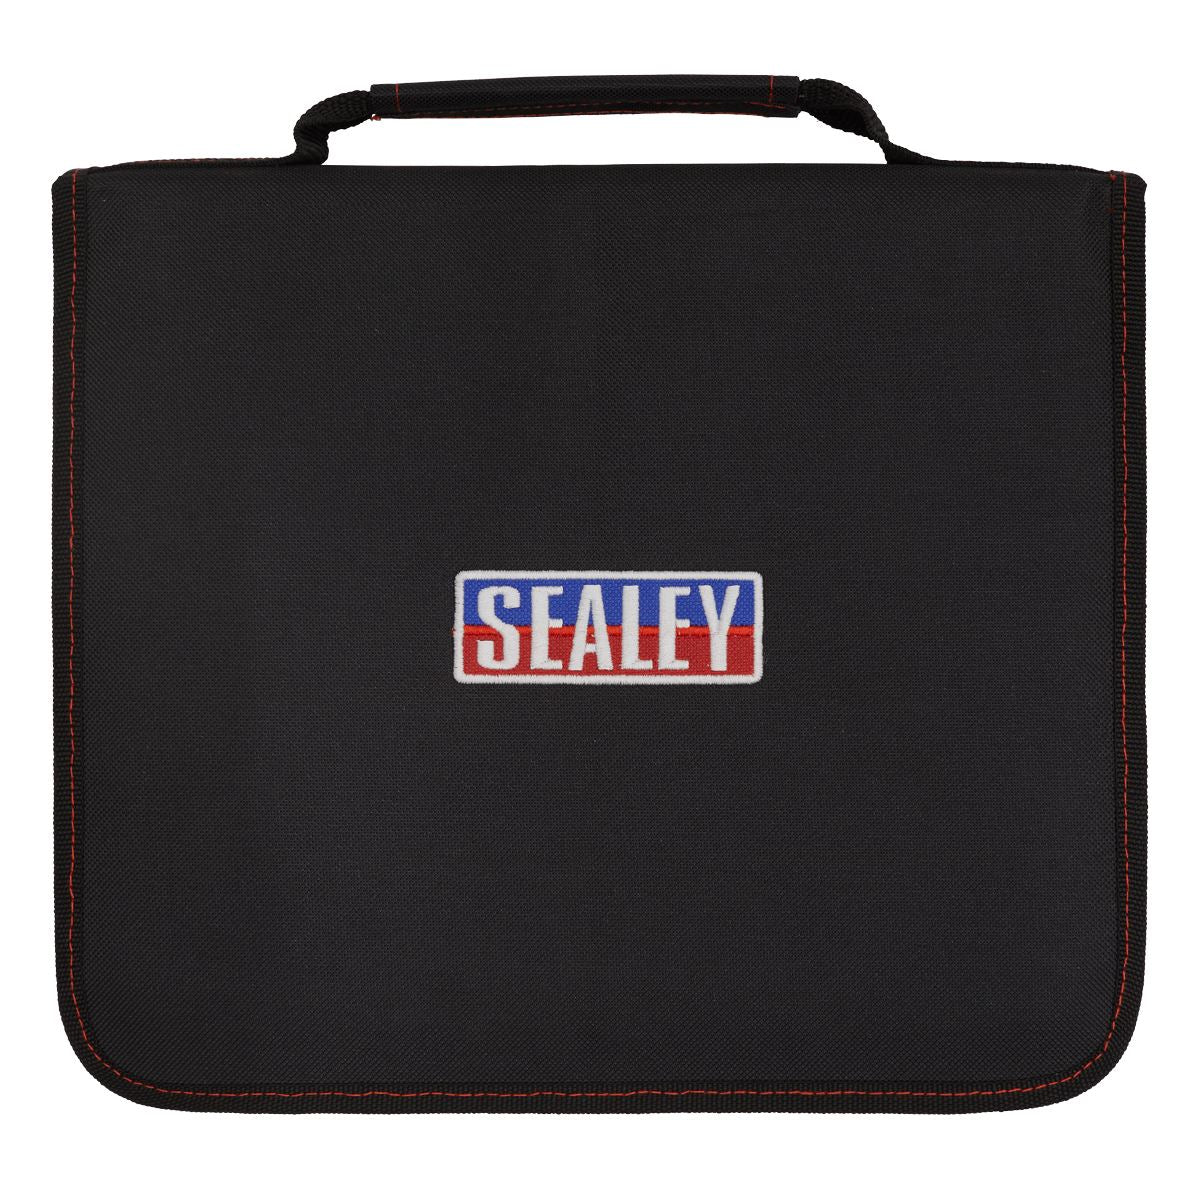 Sealey Zipped Tool Pouch 6-Pocket